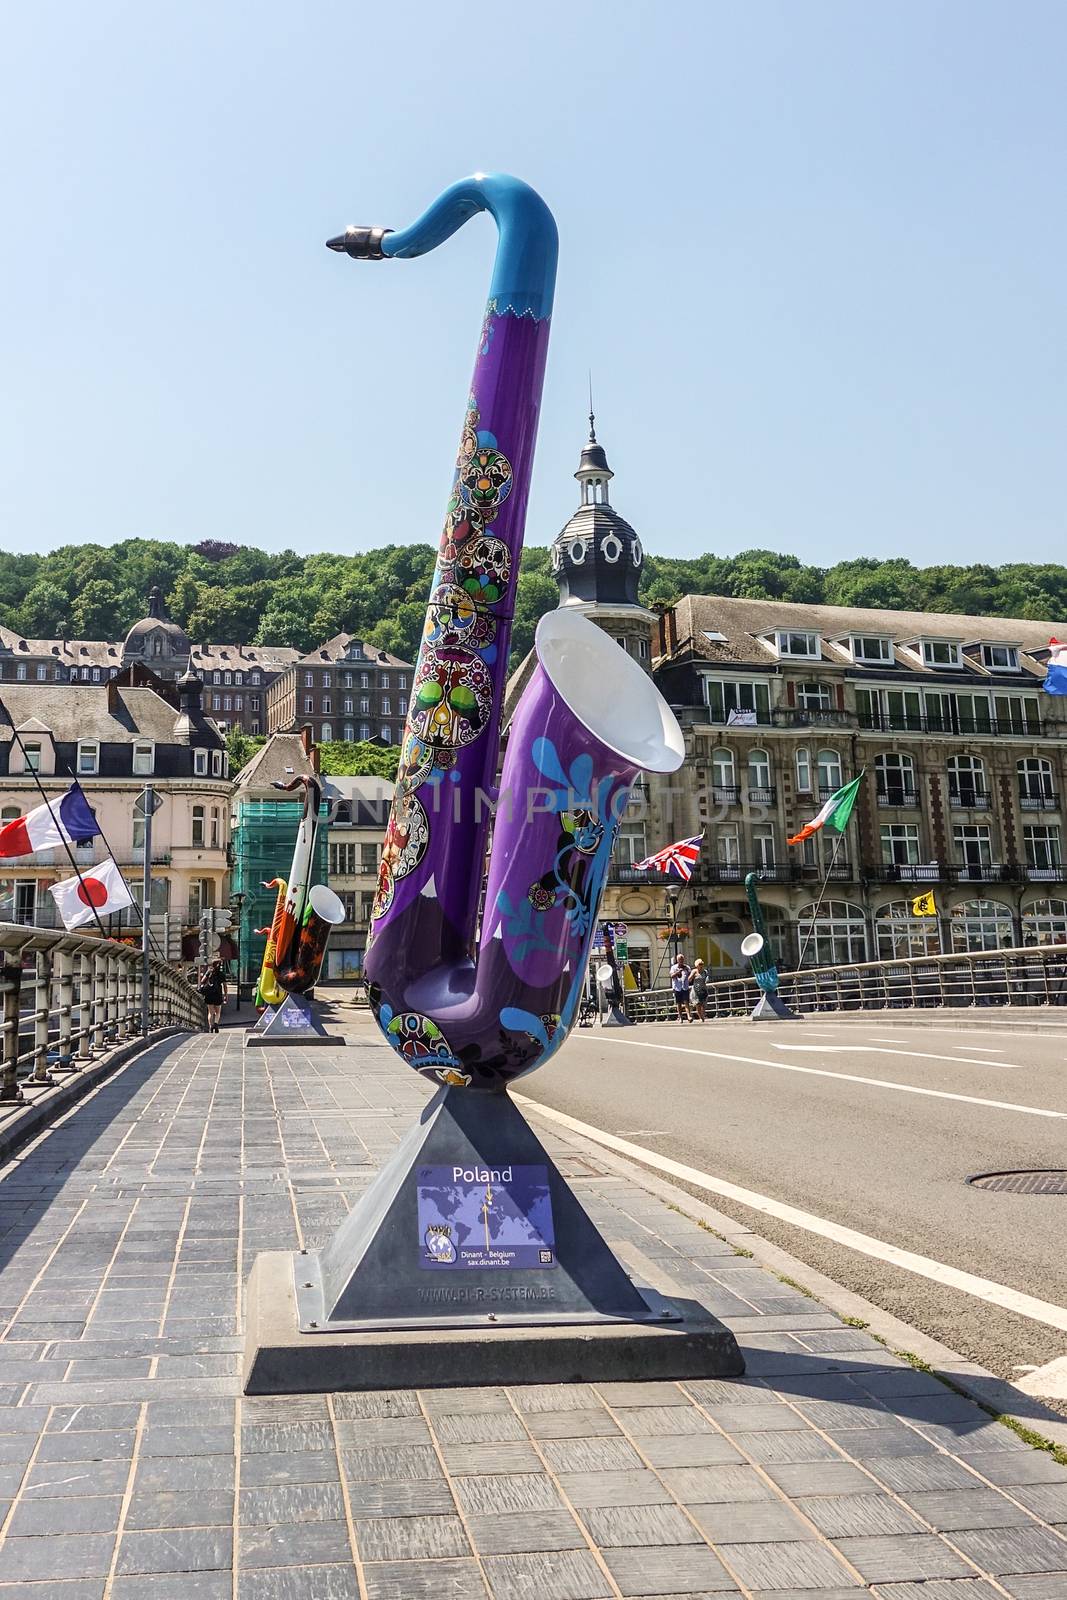 Saxophone statue to honor Poland in Dinant, Belgium. by Claudine